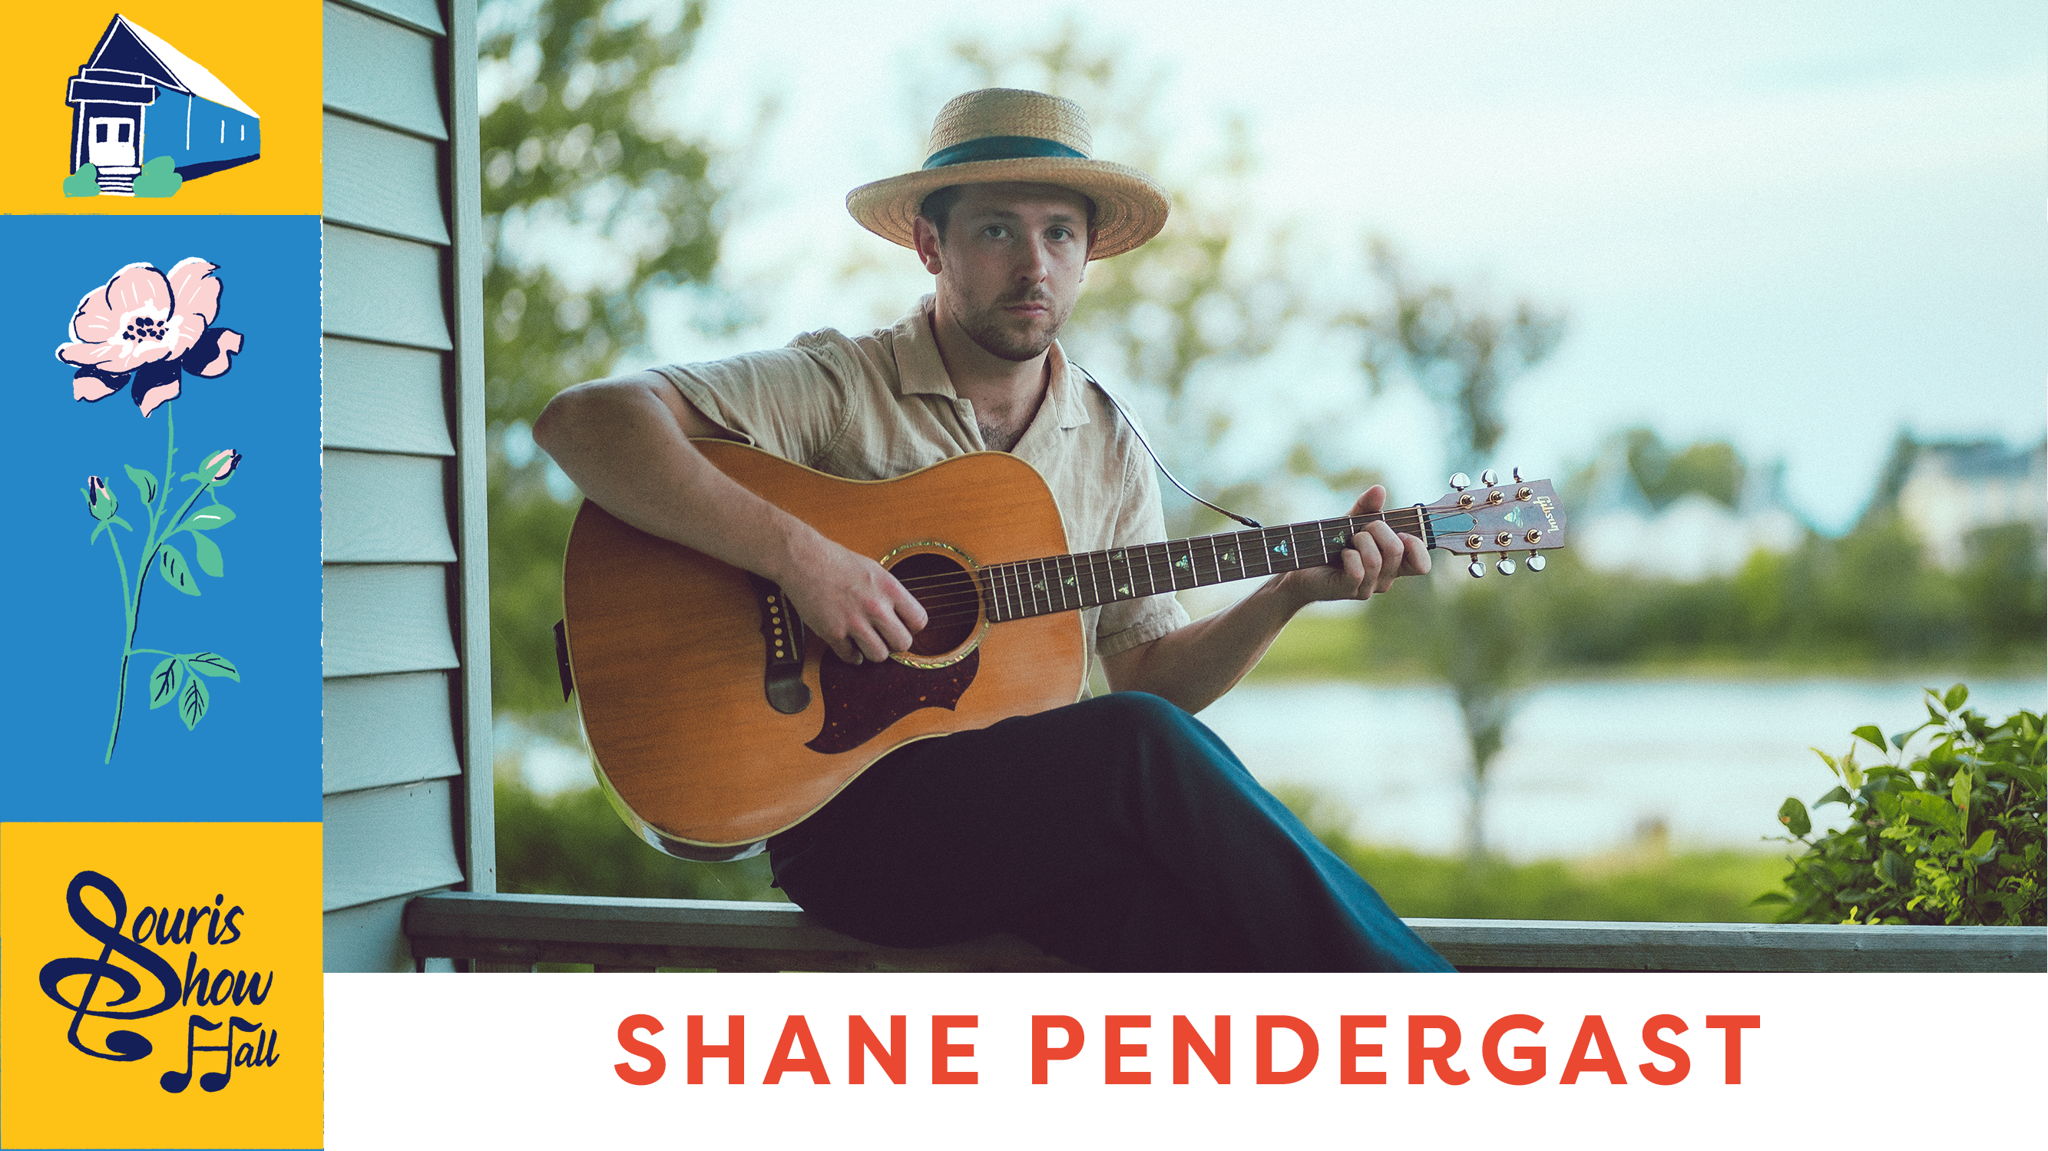 Shane Pendergast at the Souris Show Hall